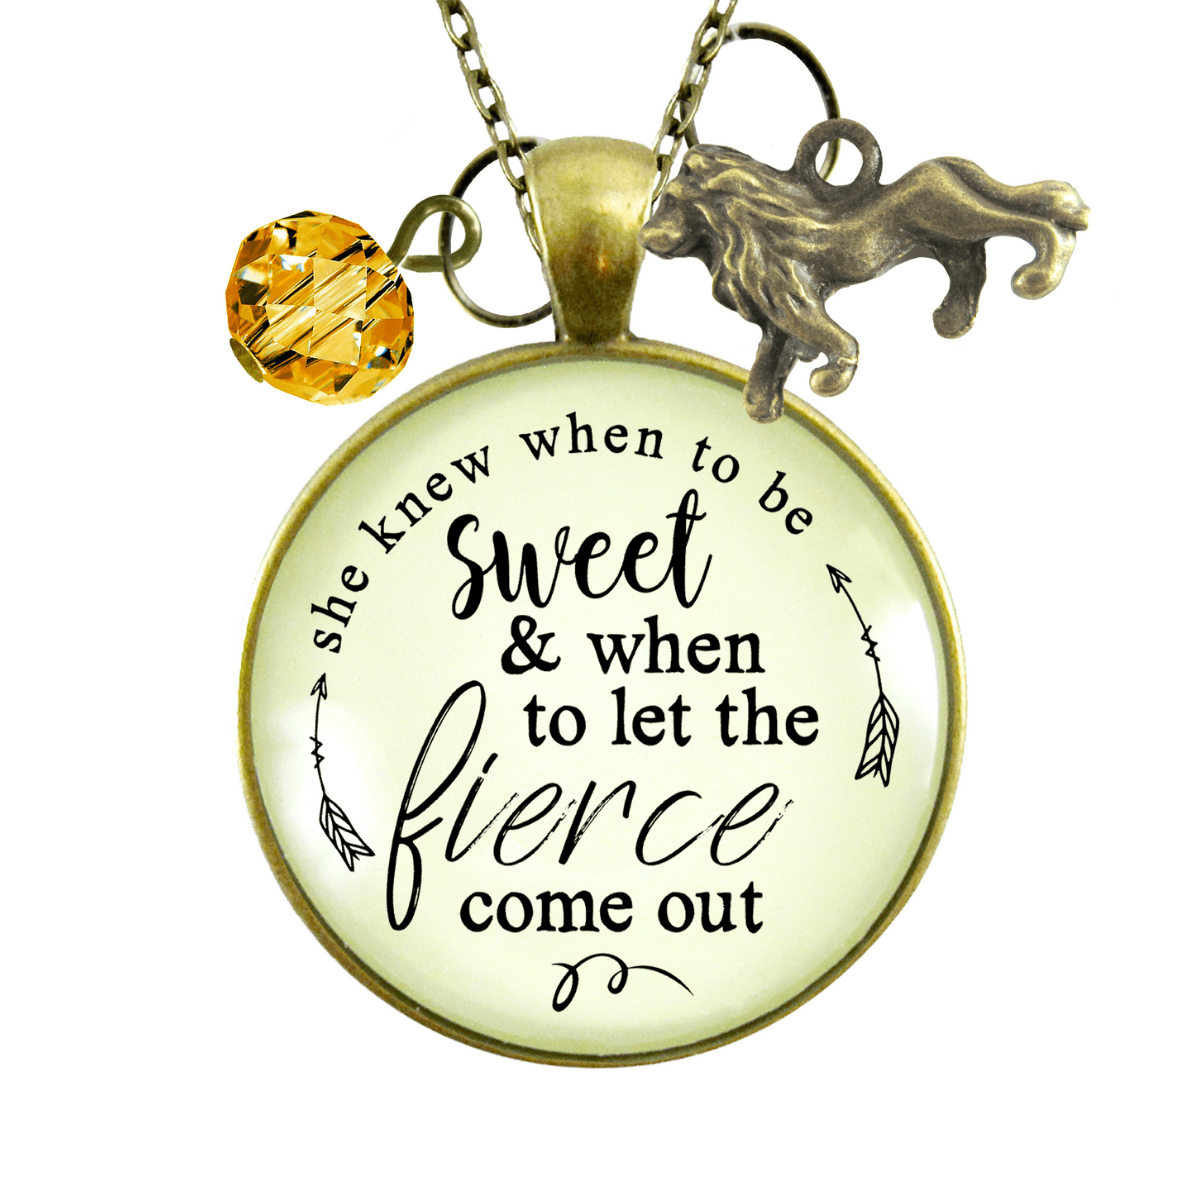 Gutsy Goodness Lion Necklace She Knew When to Be Sweet Fierce Womens Brave Life Jewelry - Gutsy Goodness;Lion Necklace She Knew When To Be Sweet Fierce Womens Brave Life Jewelry - Gutsy Goodness Handmade Jewelry Gifts